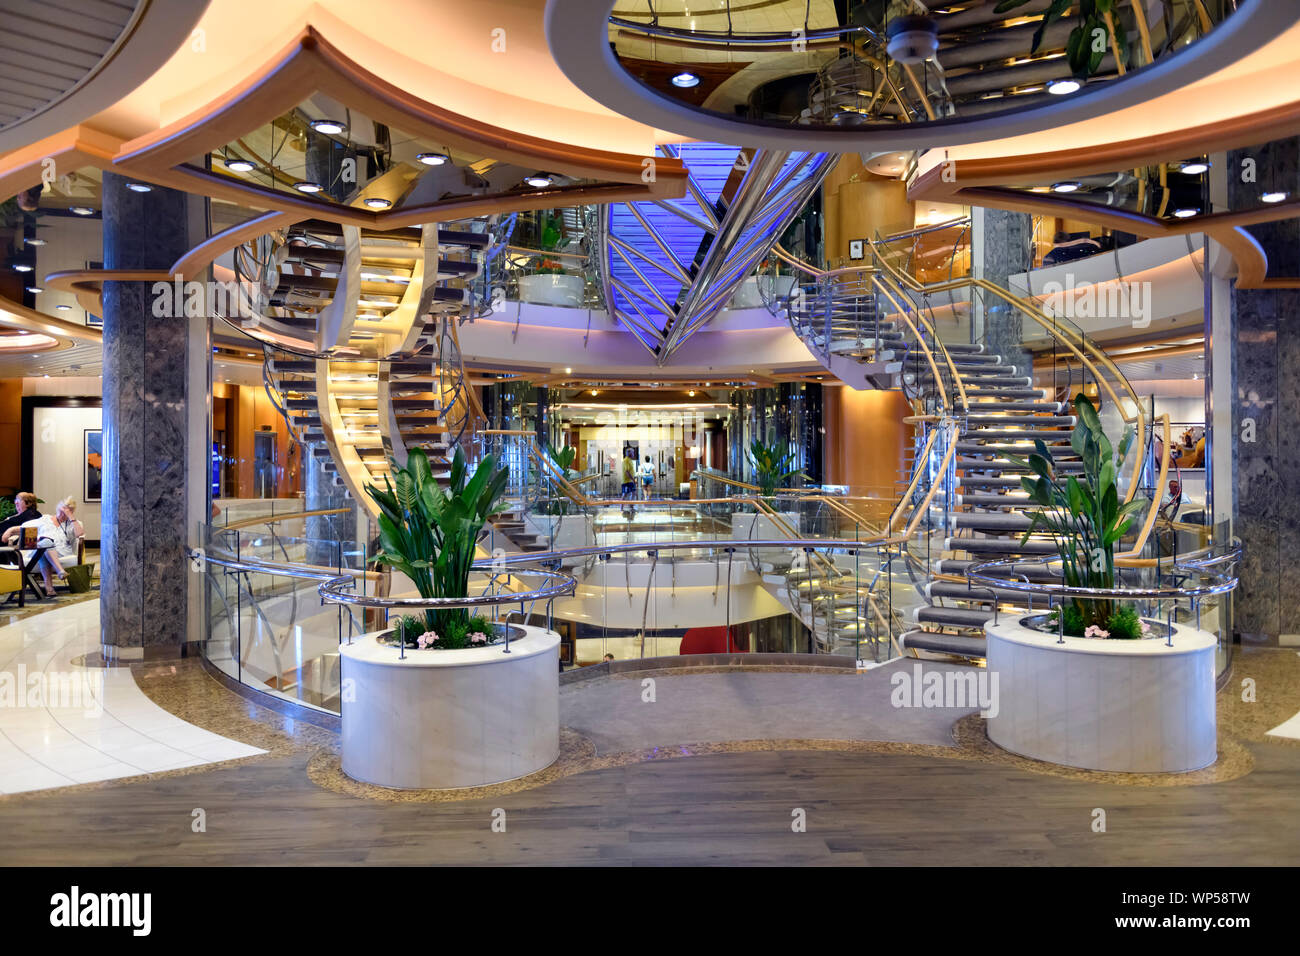 Independence of the seas cruise ship interior inside  stair cases and atrium Royal Caribbean cruise ship Independence of the seas Stock Photo